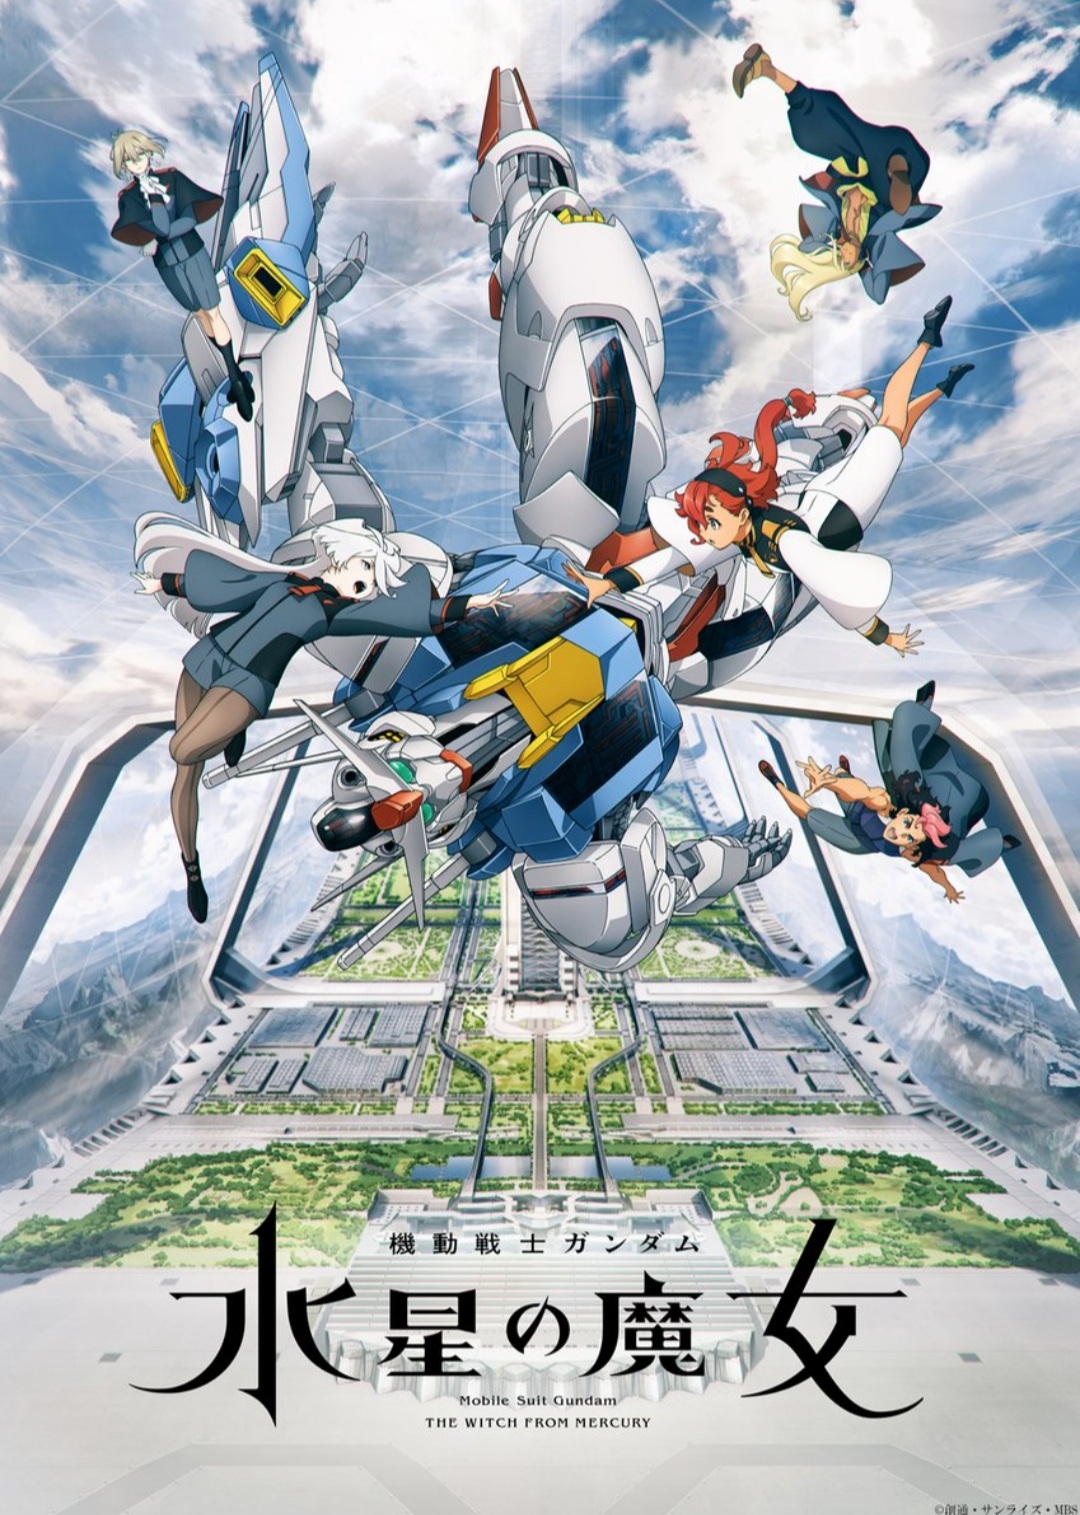 Mobile Suit Gundam: The Witch From Mercury Reveals Eng Dub Cast And Debut